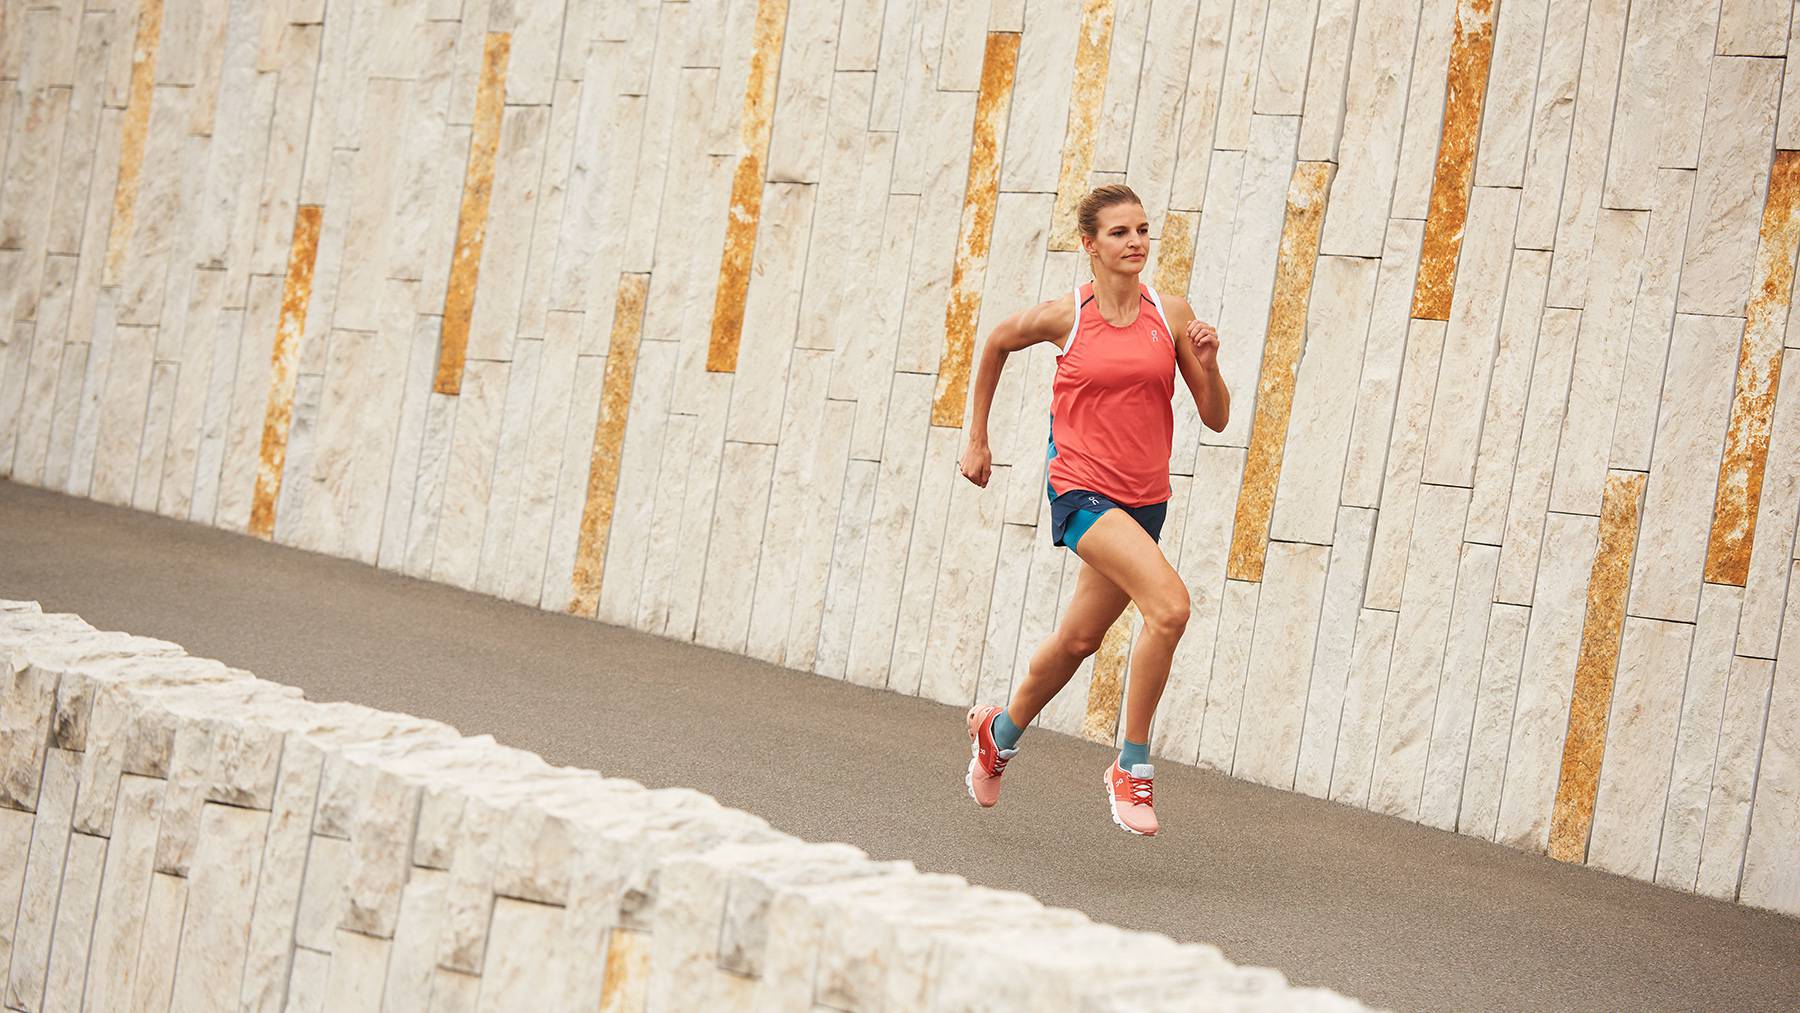 A woman wears red and white On trainers running along a concrete road.